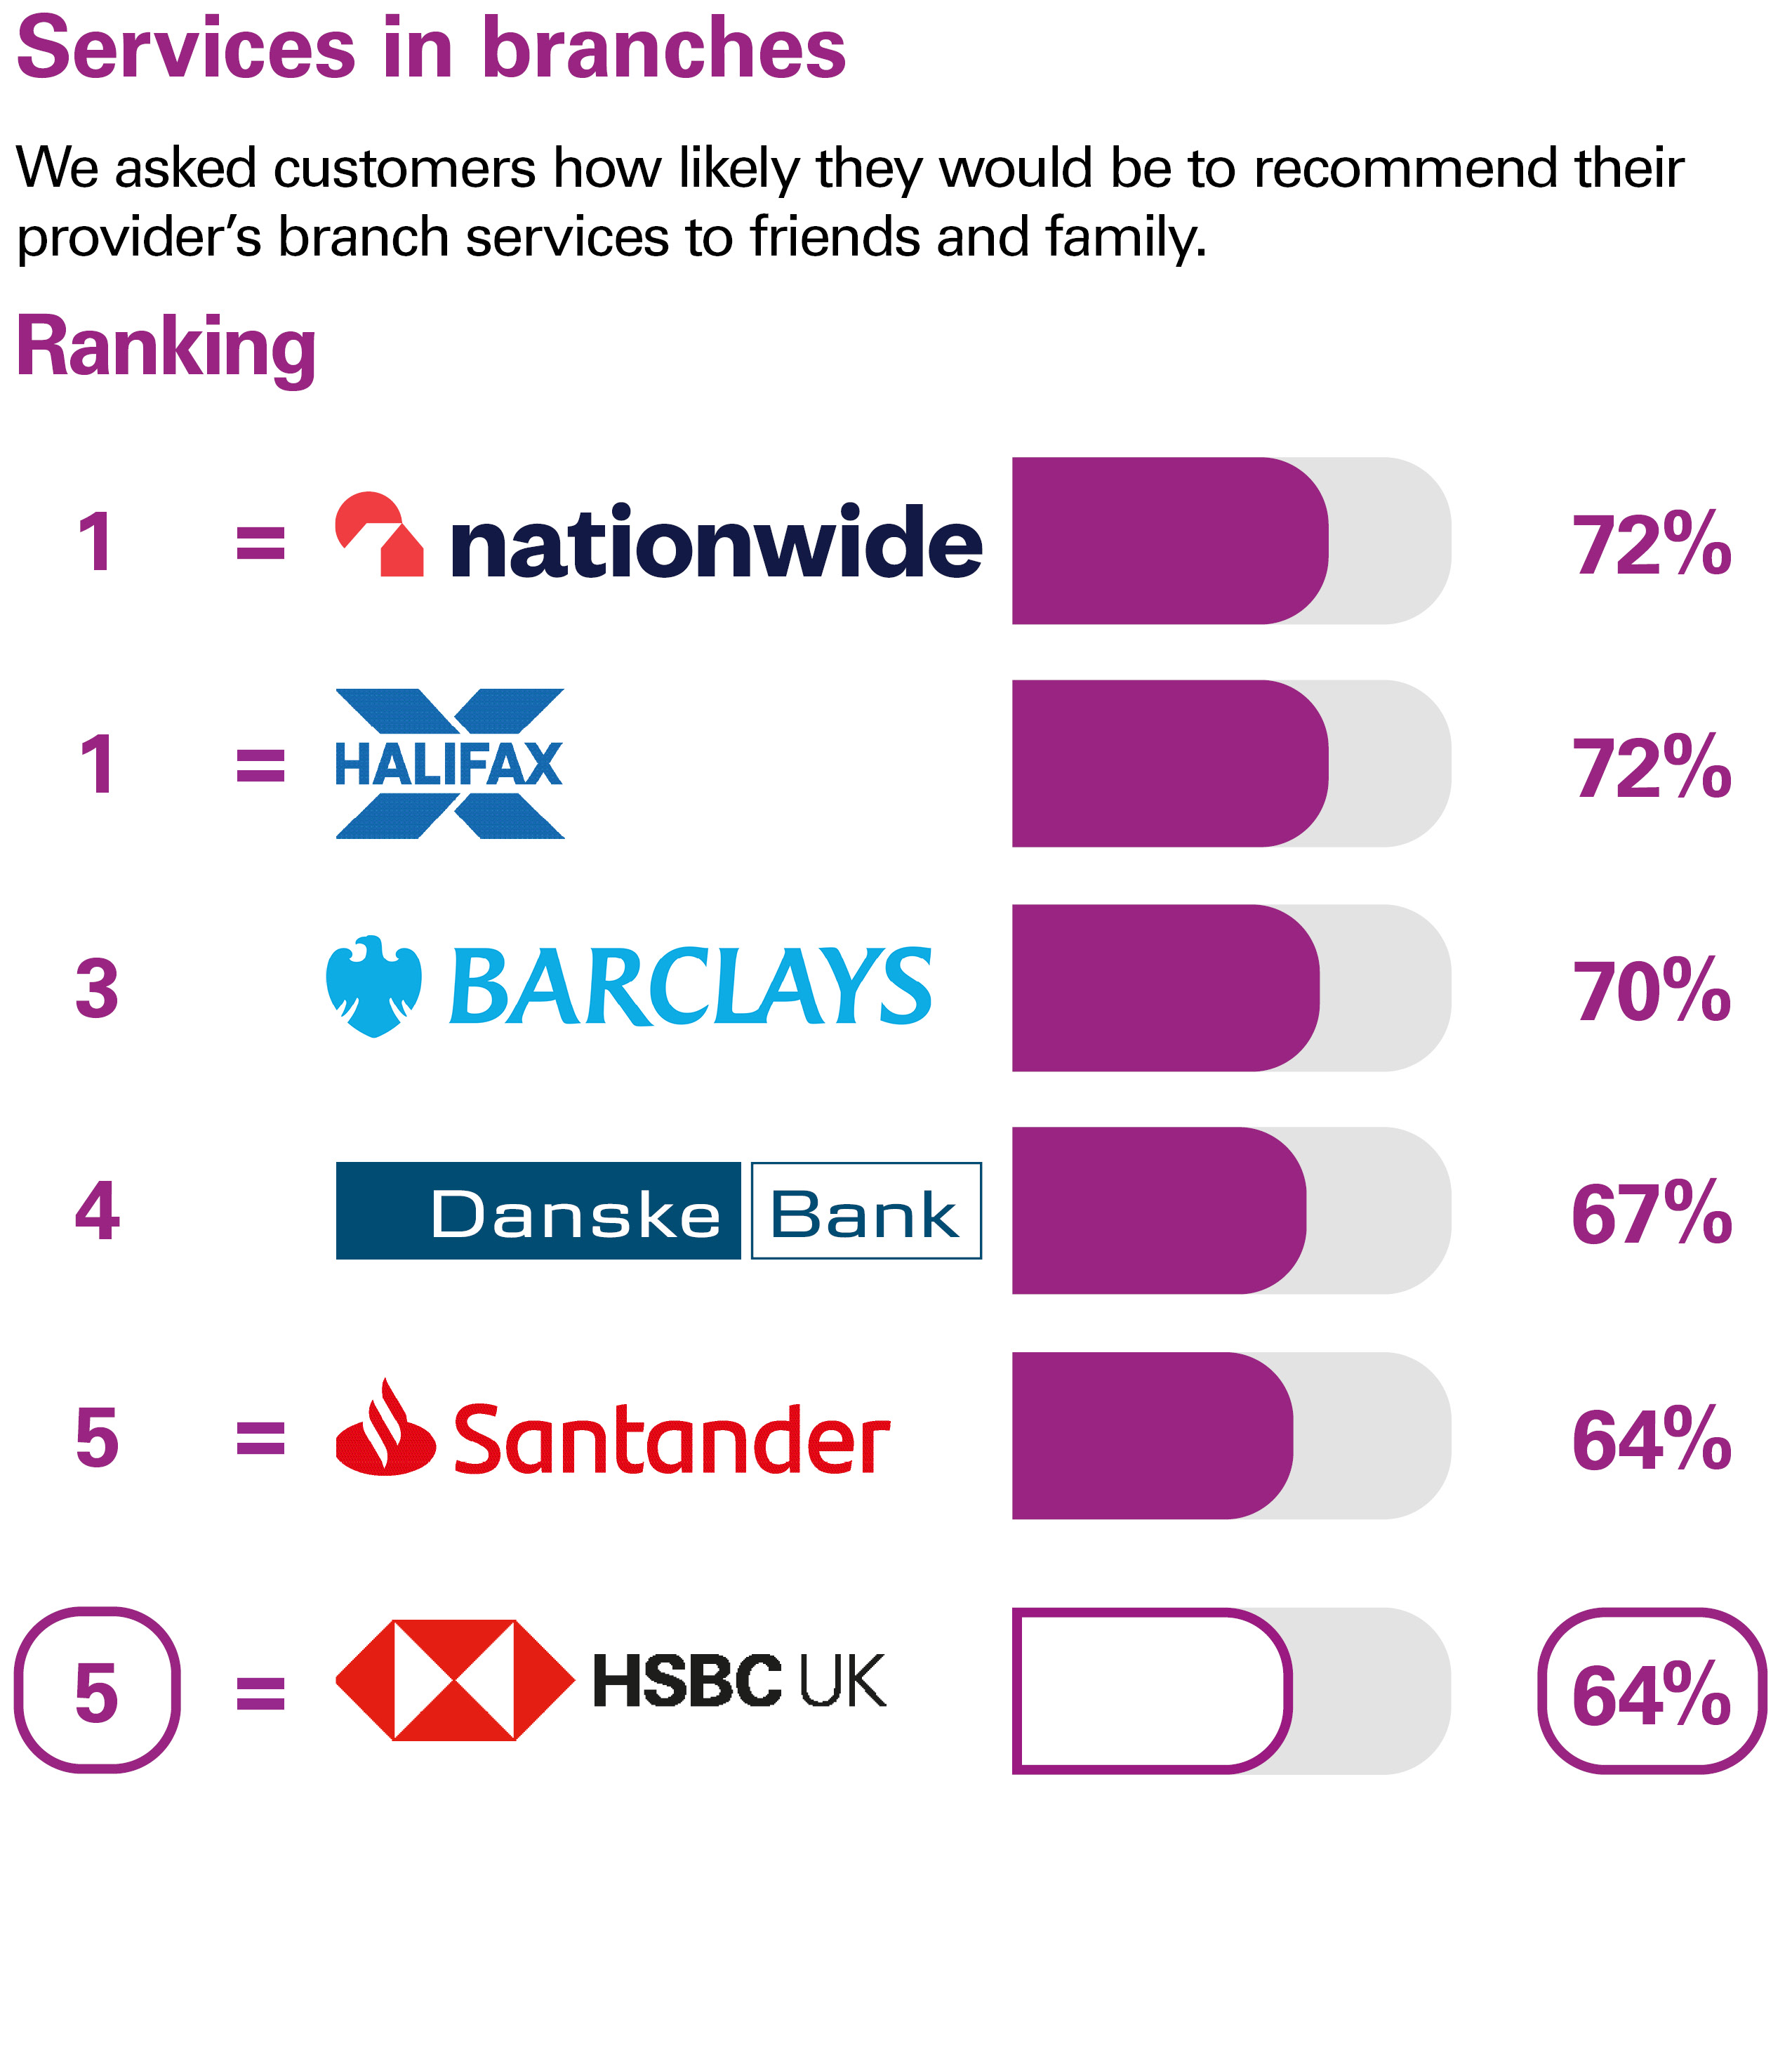 Services in branches. We asked customers how likely they would be to recommend their provider’s branch services to friends and family. Ranking: equal 1 Nationwide 72% equal 1 Halifax 72% 3 Barclays 70% 4 Danske Bank 67% equal 5 Santander 64% equal 6 HSBC UK 64%.